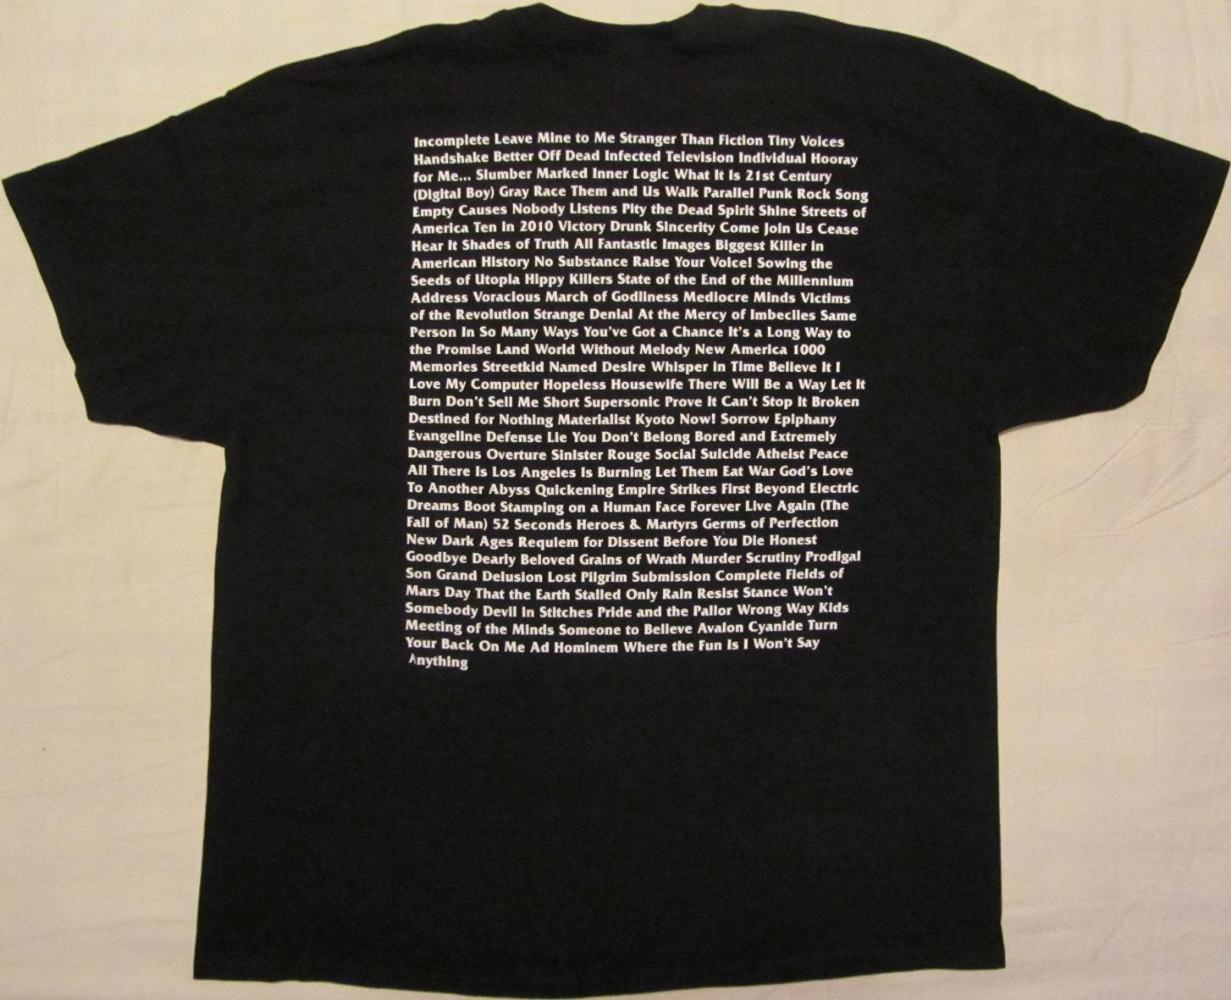 T-shirts - Short sleeves | Collectibles | The Bad Religion Page - Since ...